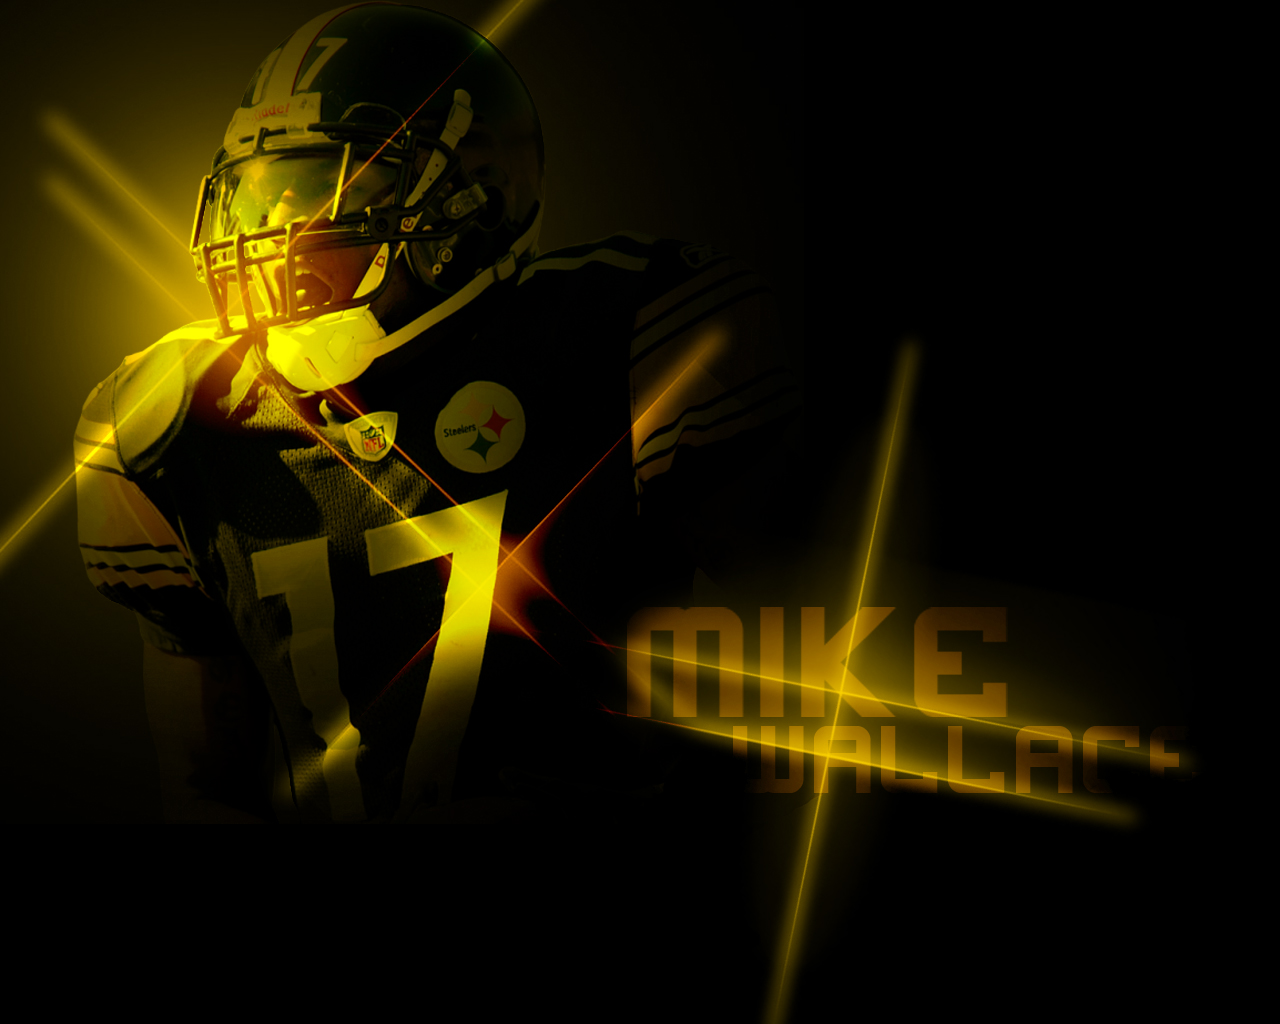 Mike Wallace Fast Money Wallpaper